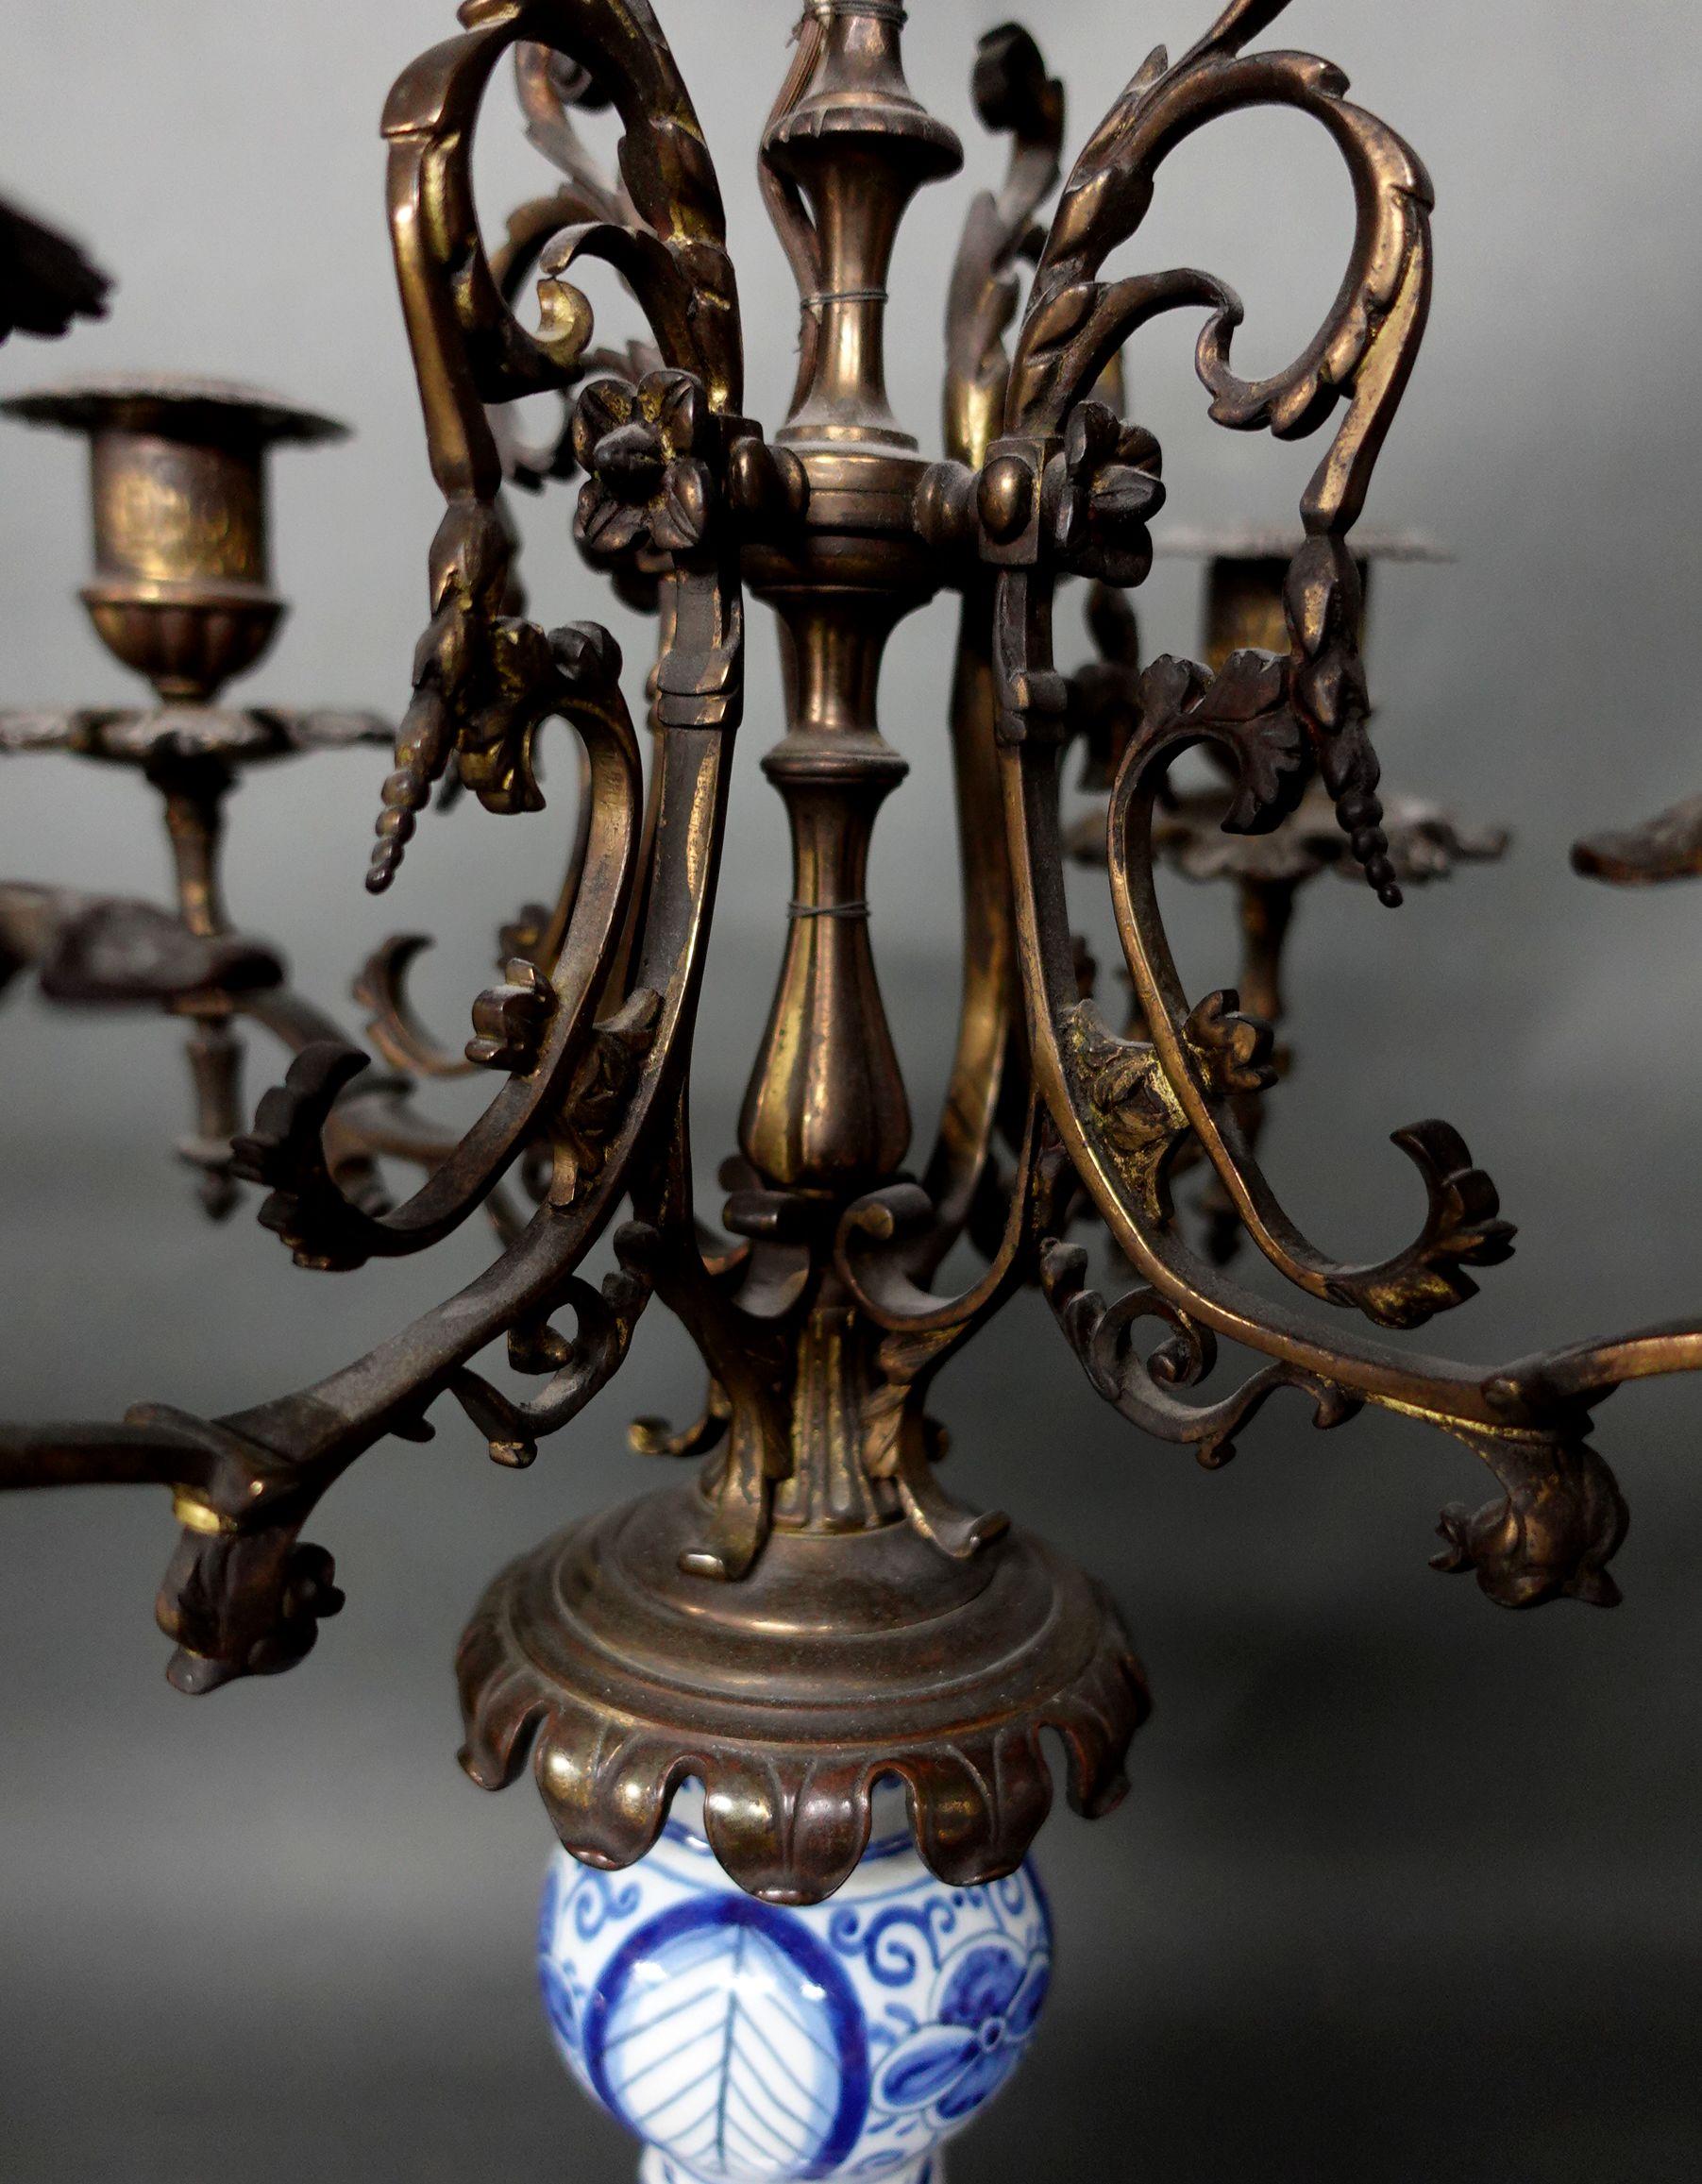 19th Century Pair of Blue and White Gilt-Bronze Candelabras and Lamps on Marble Bases For Sale